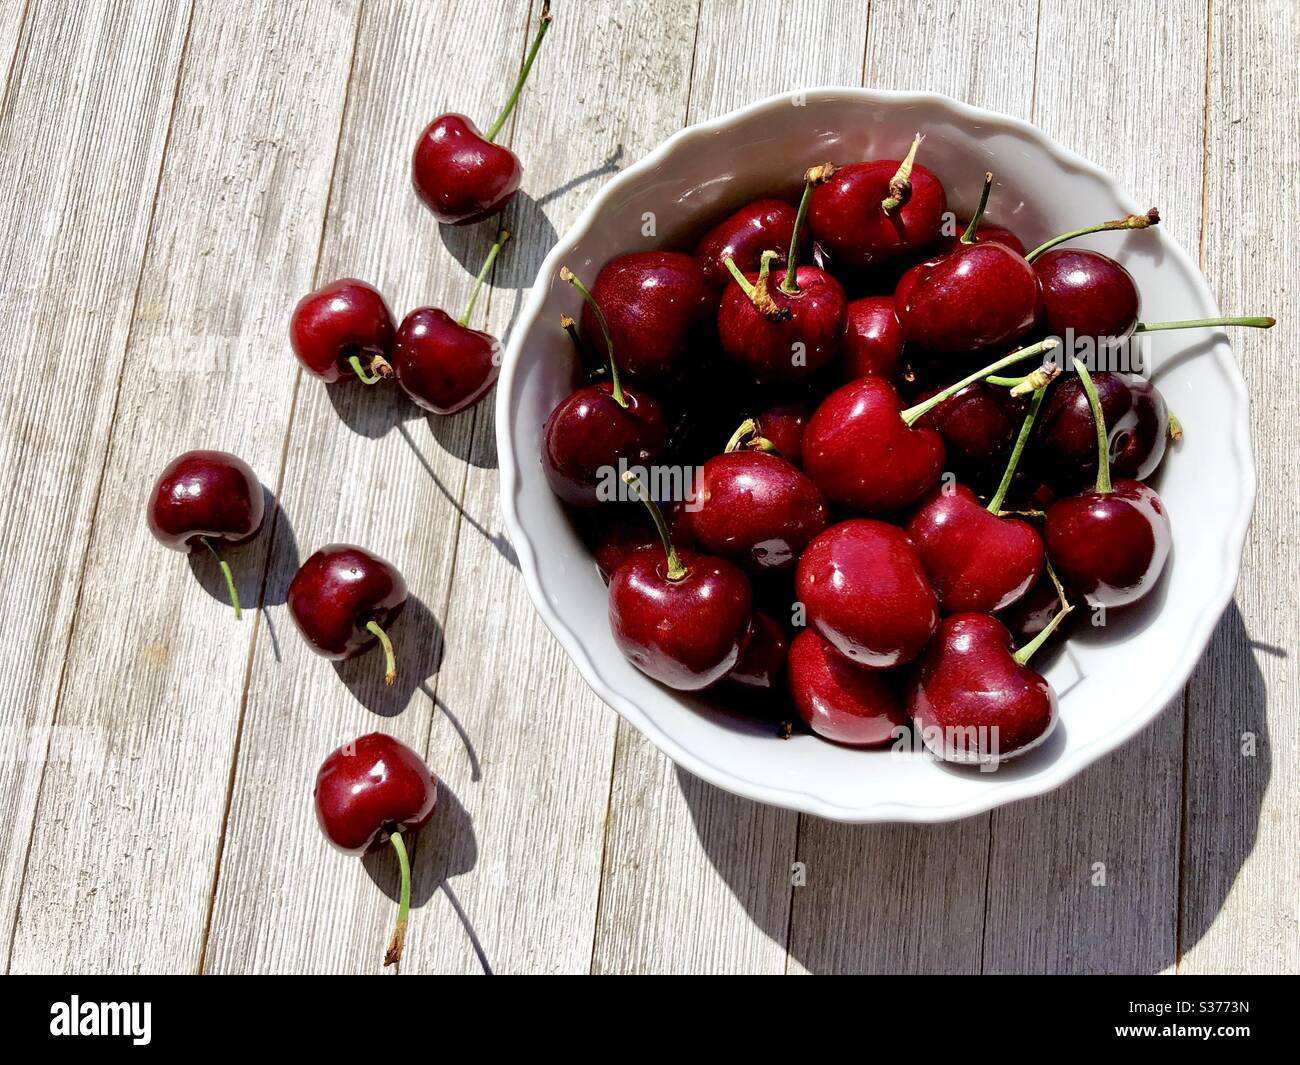 Sweet cherries in a white bowl Stock Photo